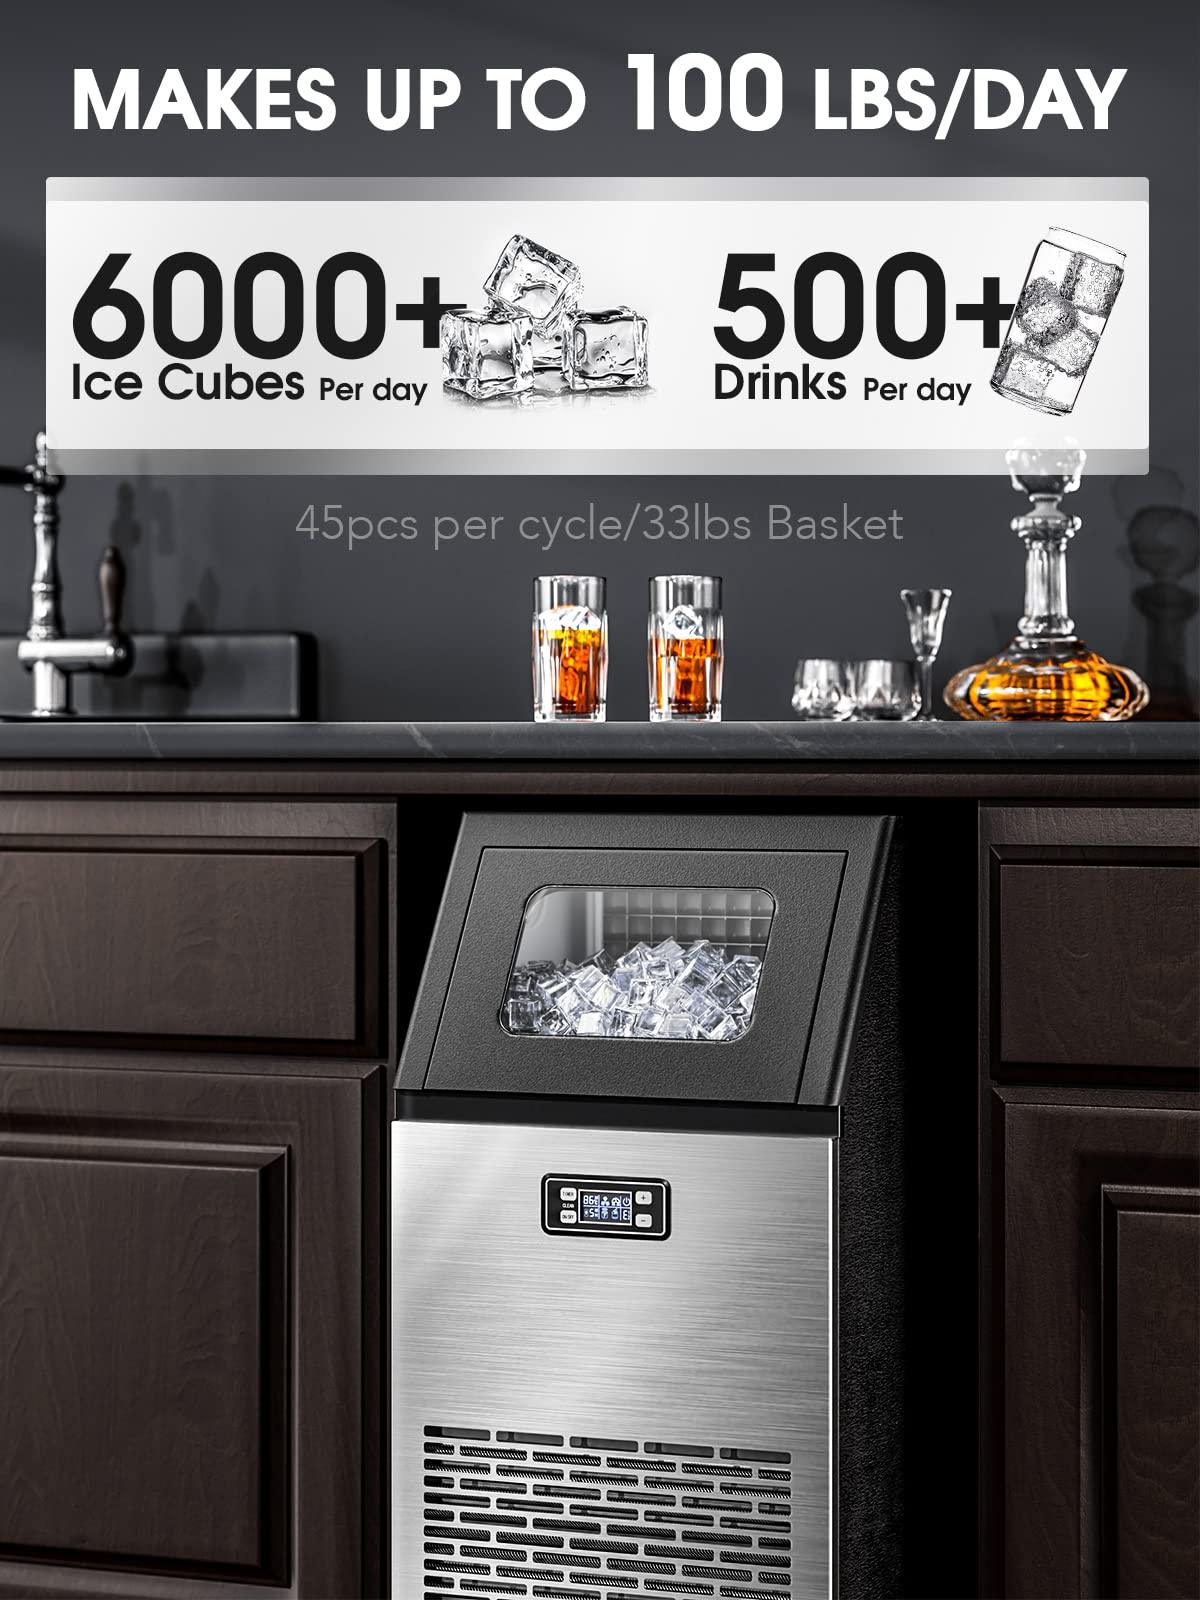 Joy Pebble V2.0 Commercial Ice Maker,100 lbs,2-Way Add Water,Large Ice Maker Self Cleaning,Ice Machine with 24 Hour Timer,33 lbs Basket,Stainless Steel Ice Makers for School,Home,Bar,RV - CookCave